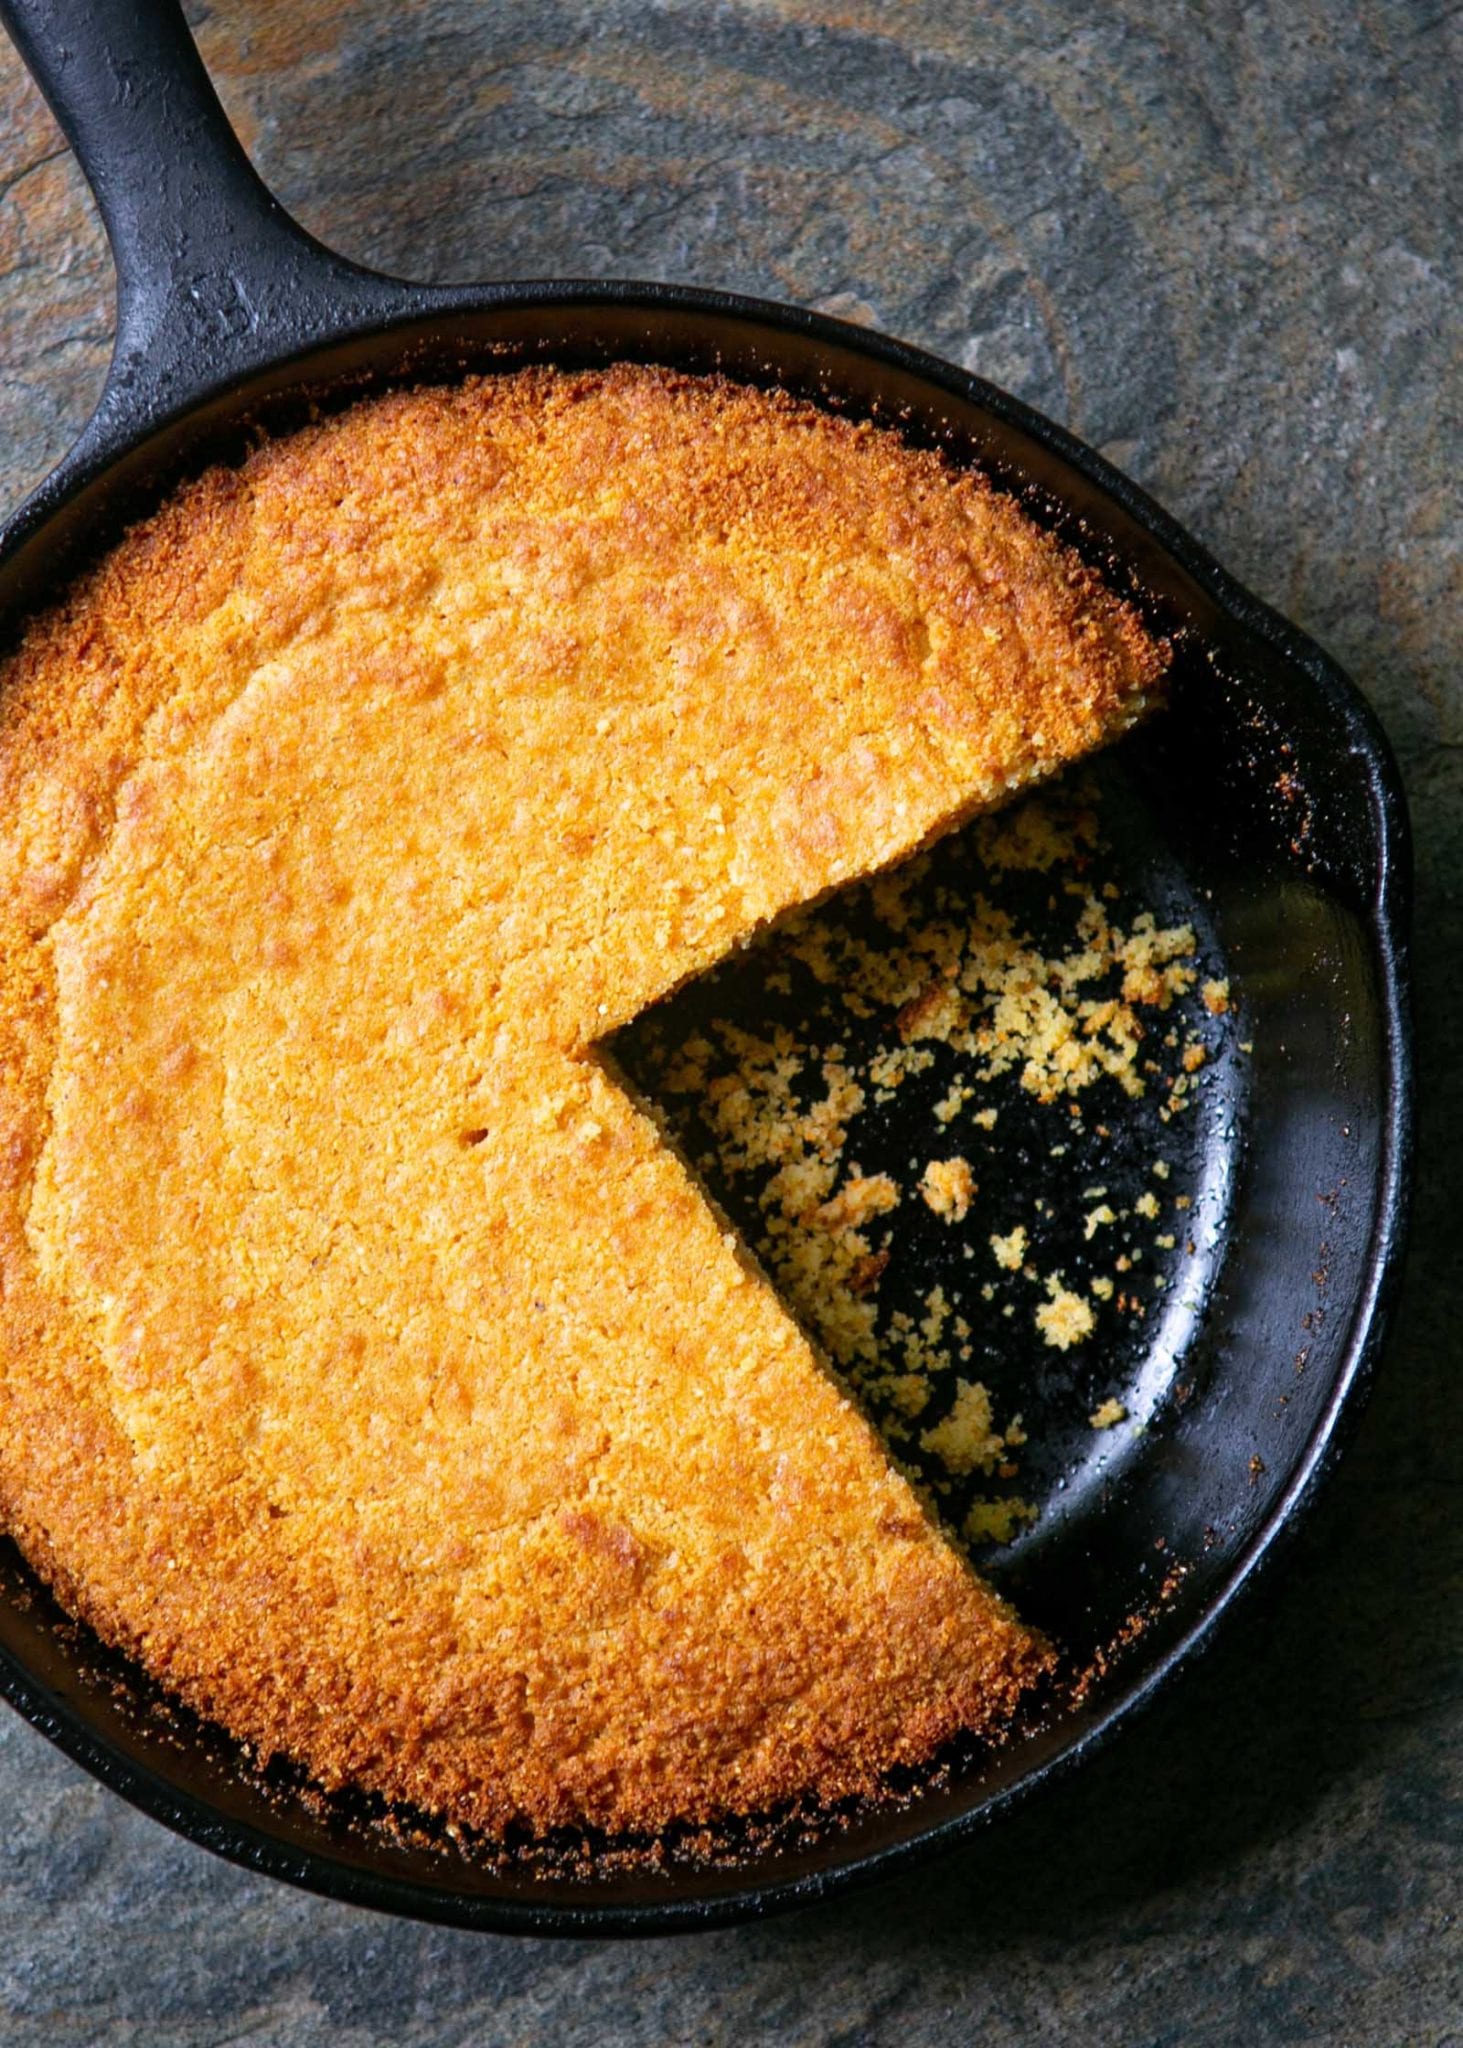 Overhead view of homemade cornbread baked in a cast iron skillet with a large slice missing.